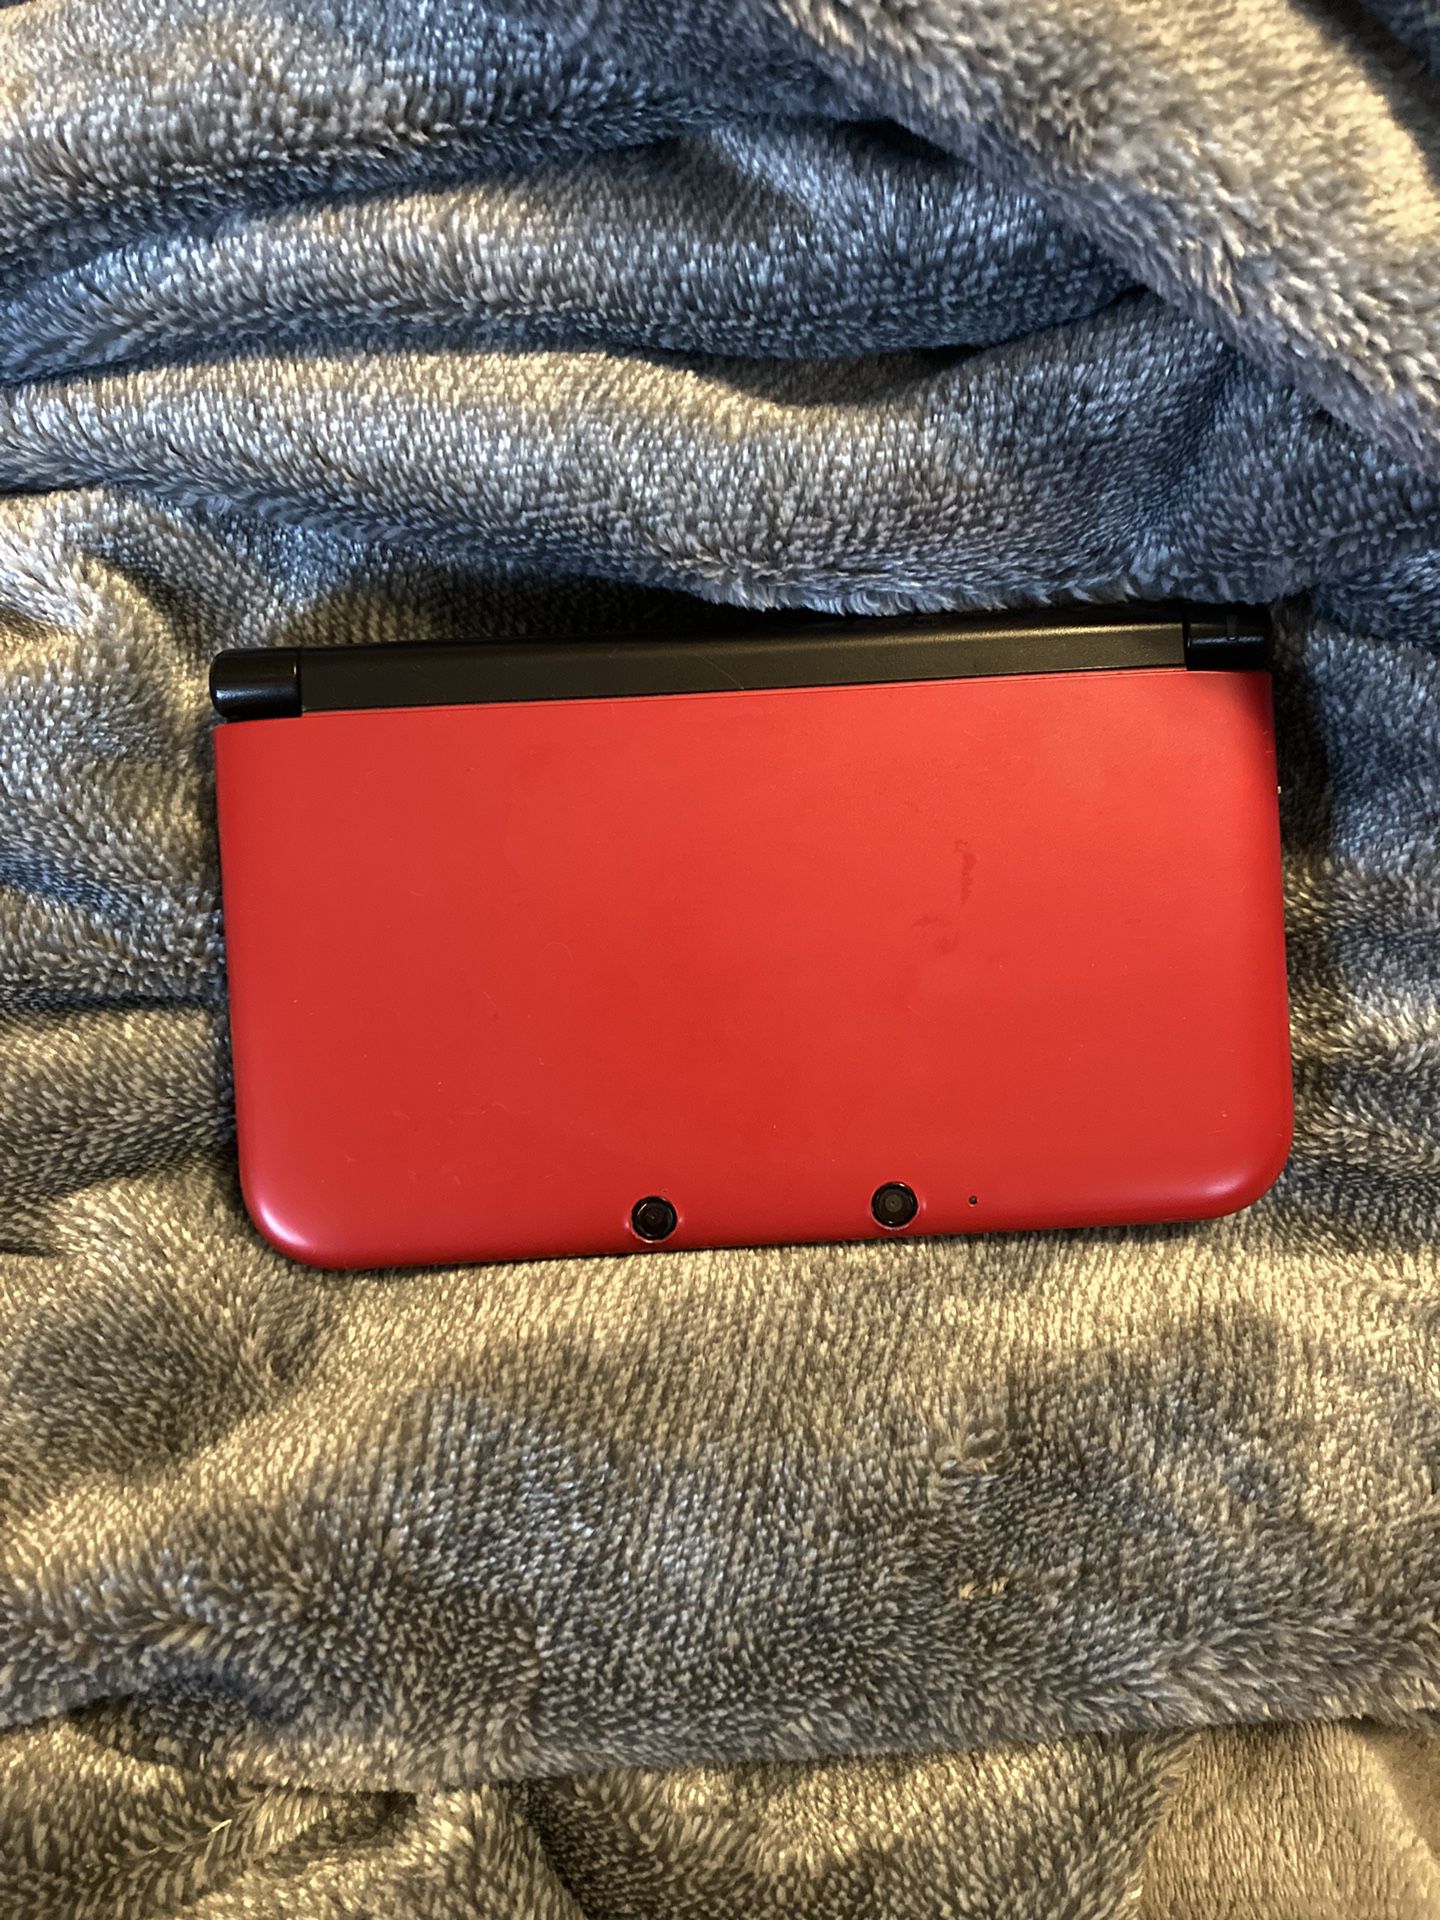 Nintendo 3DS XL (Red)